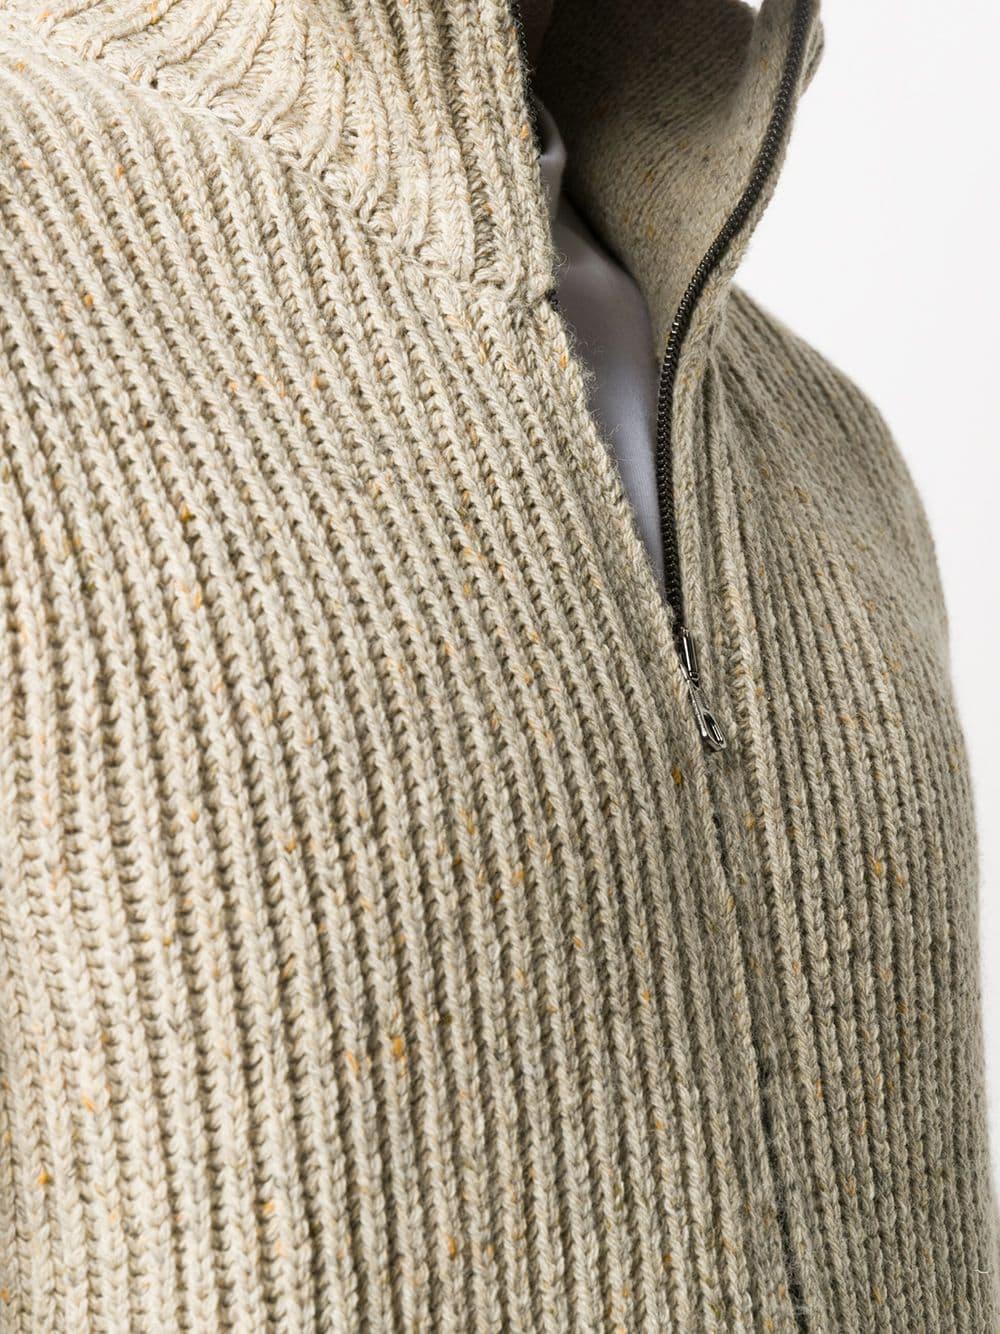 Massimo Alba Wool Ribbed-knit High Neck Cardigan in Natural for Men - Lyst